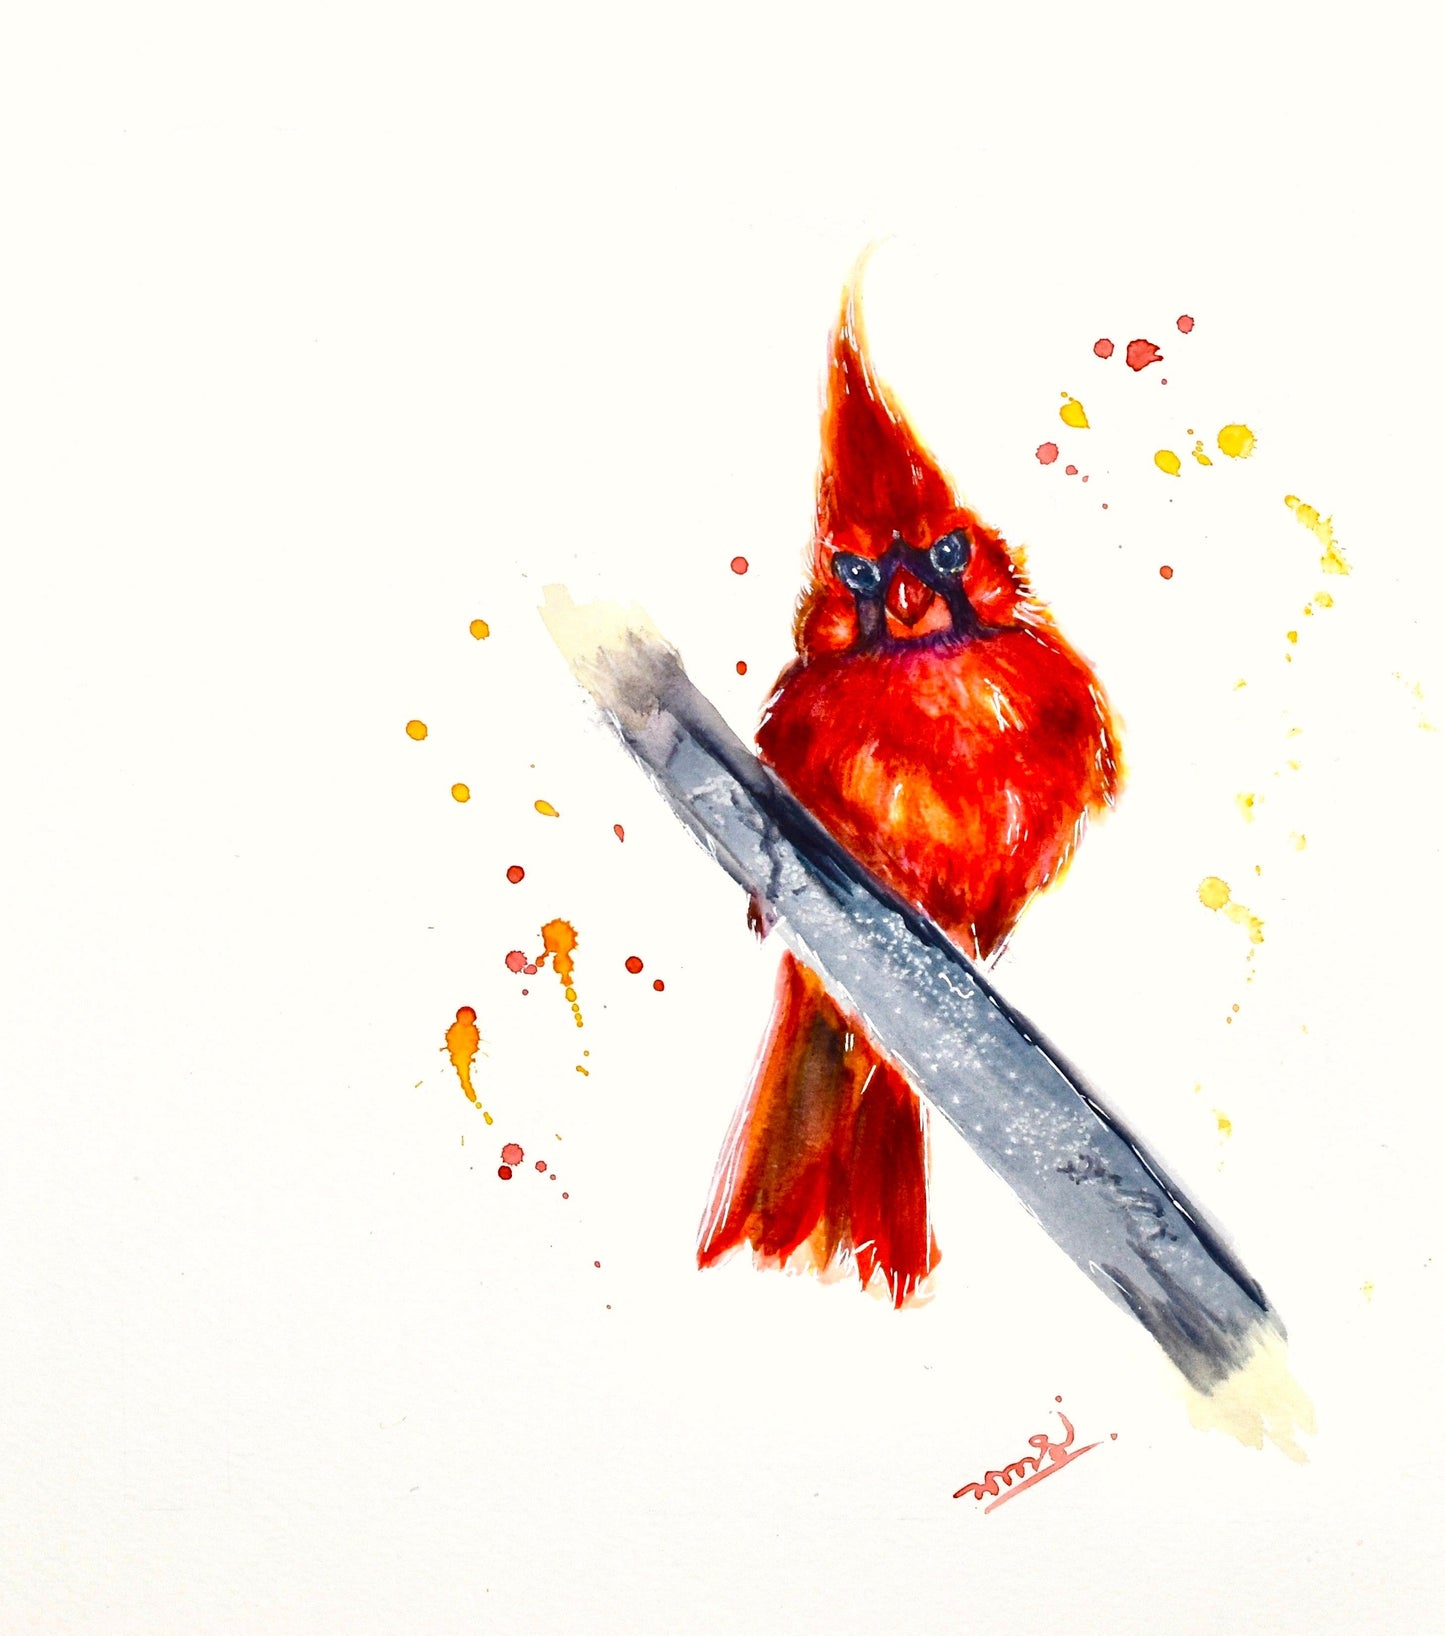 "Hello Cardinal" Abtract watercolor bird prints - Essence of the art by Yui & Bow